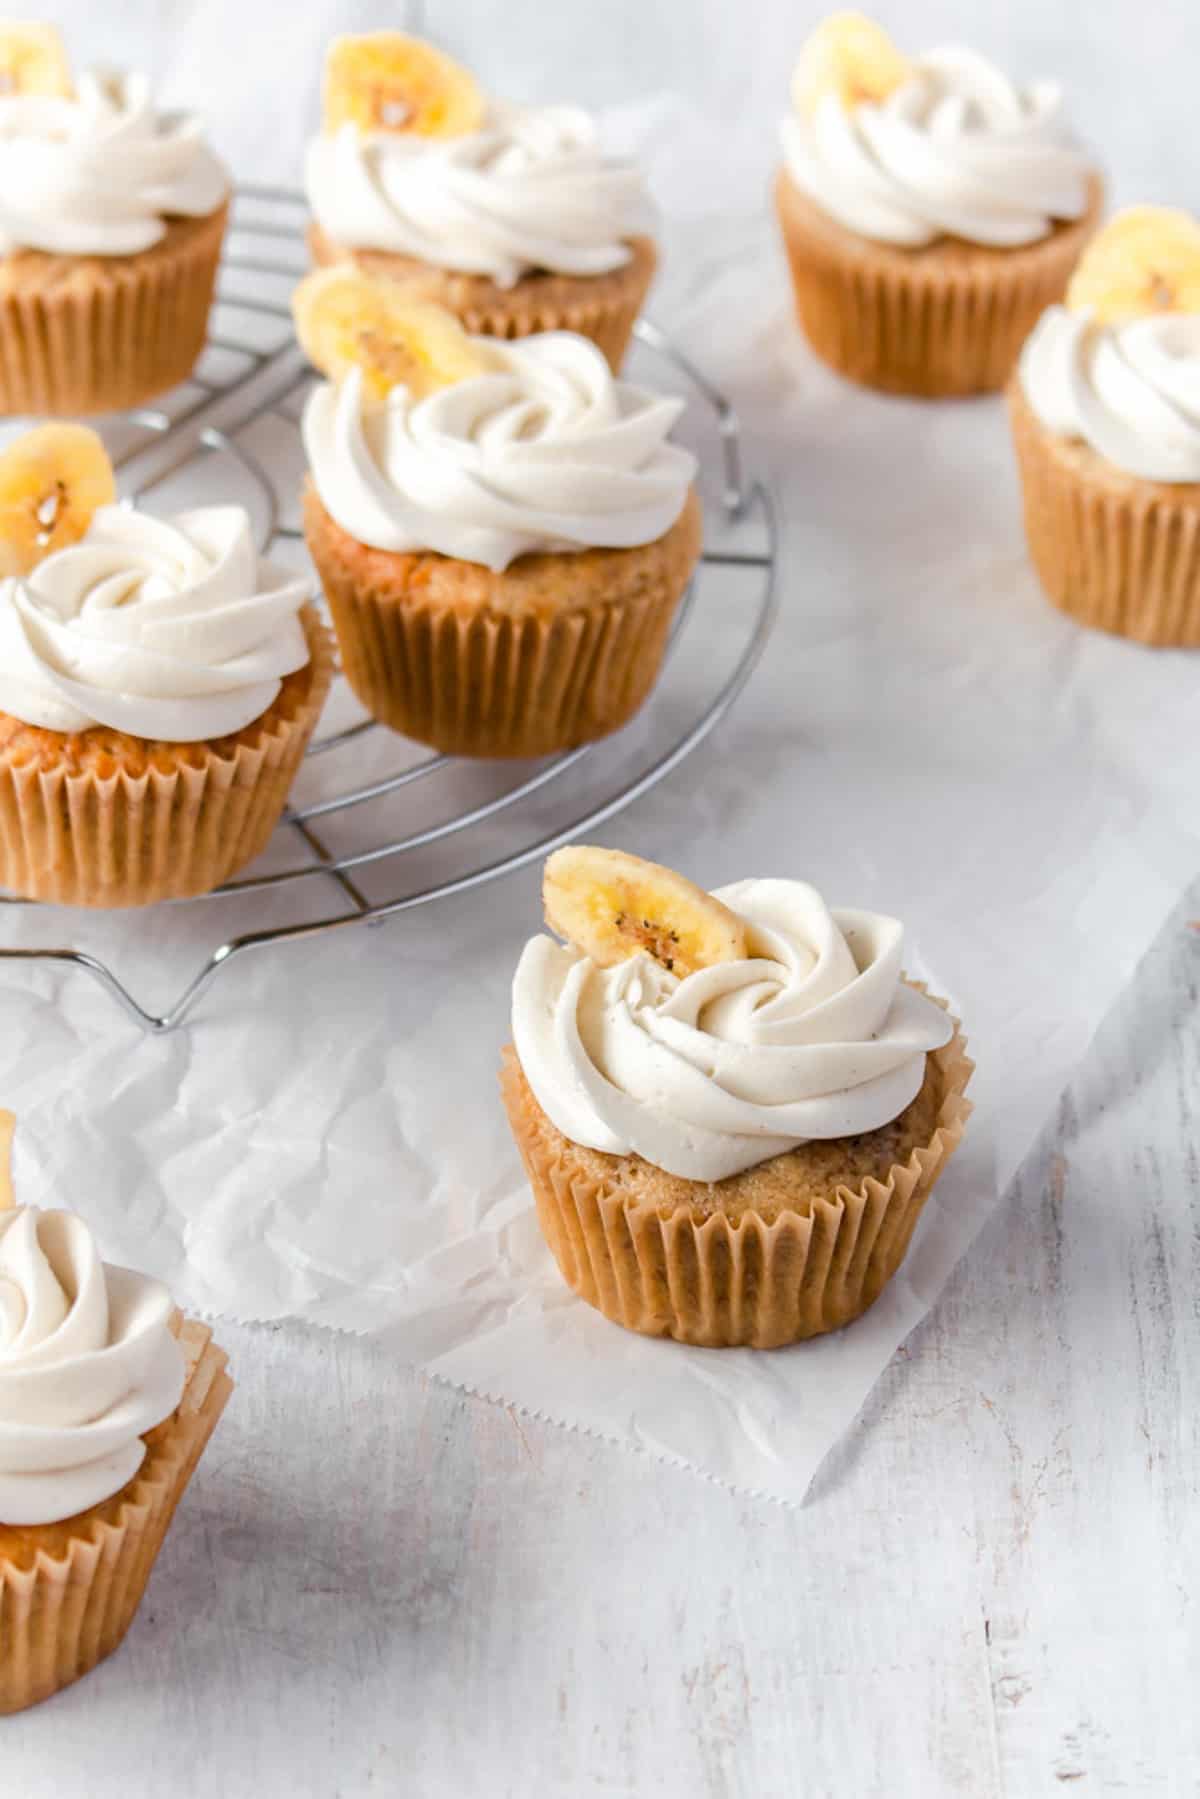 Banana cupcakes with buttercream frosting piped on top and decorated with a banana chip scattered on a white surface.